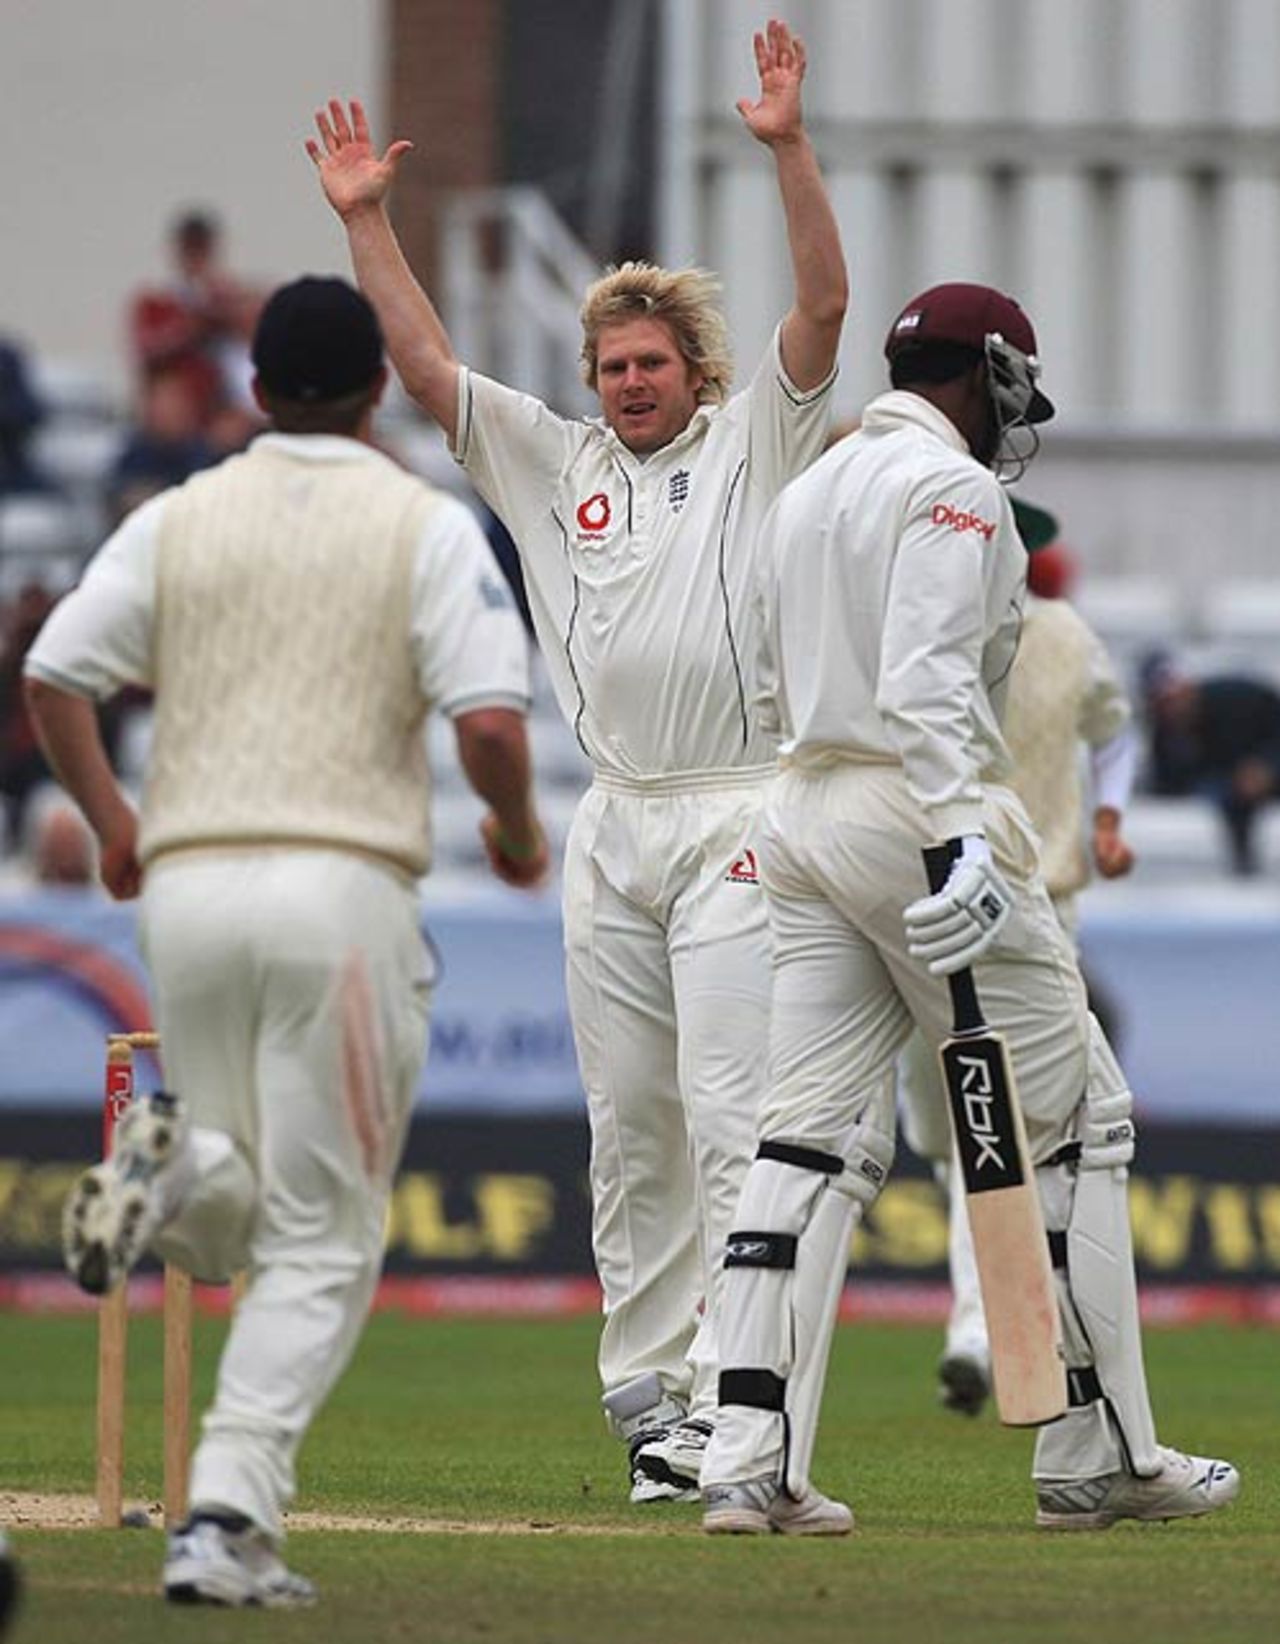 Matthew Hoggard dismissed Chris Gayle early on the fifth day, England v West Indies, 4th Test, Chester-le-Street, June 18, 2007